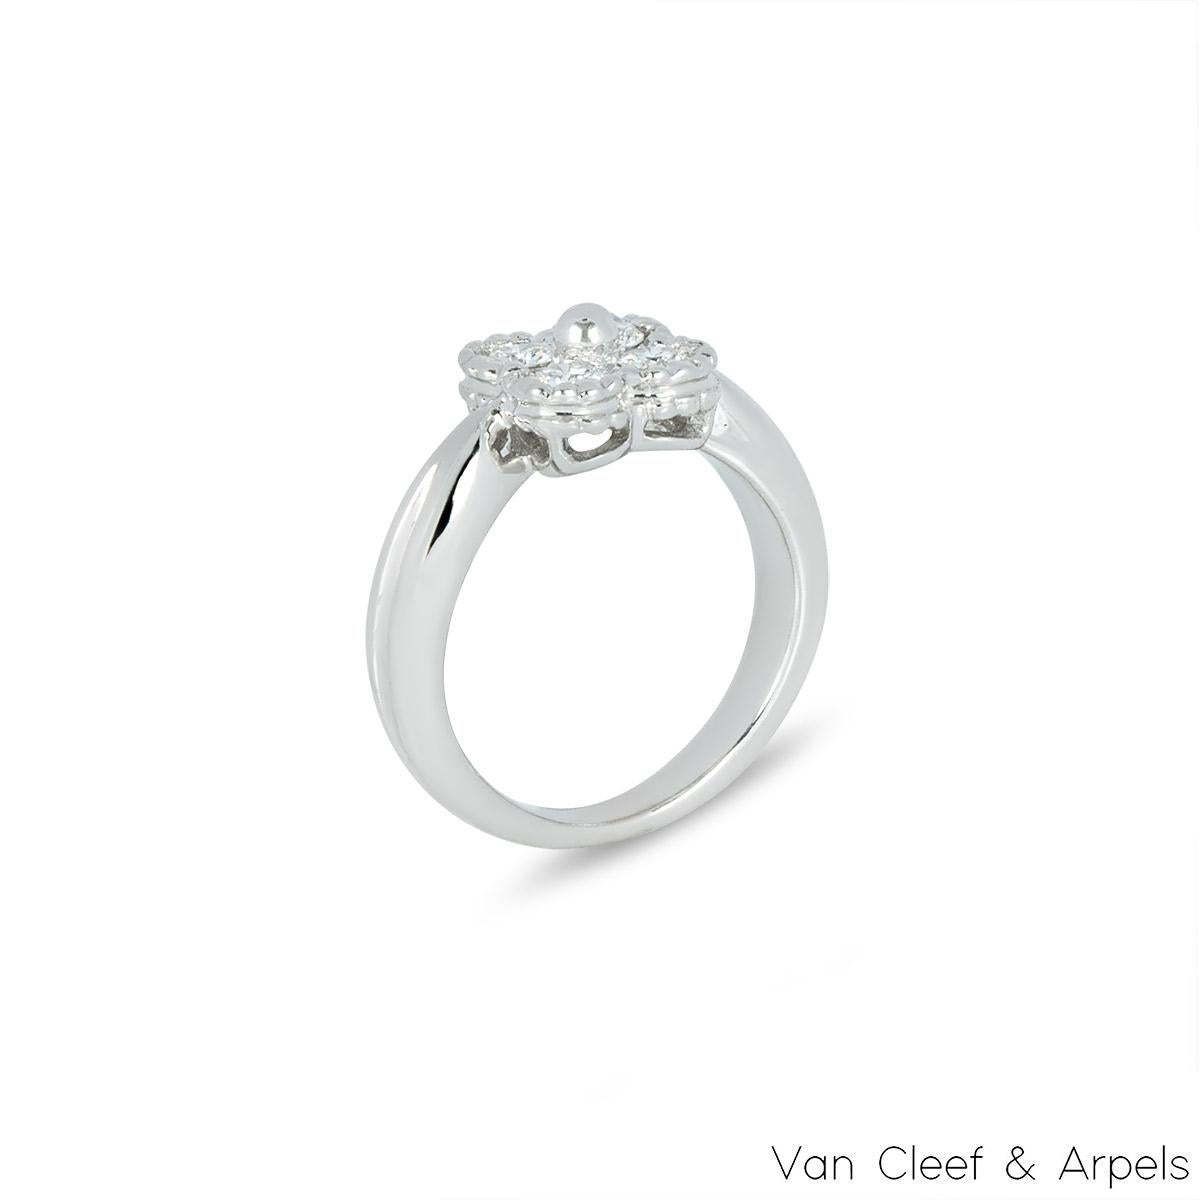 A lovely 18k white gold Van Cleef & Arpels diamond ring from the Alhambra collection. The central flower motif is set with 4 round round brilliant cut diamonds in a pave setting weighing approximately 0.28ct. The ring is currently a size UK E / EU